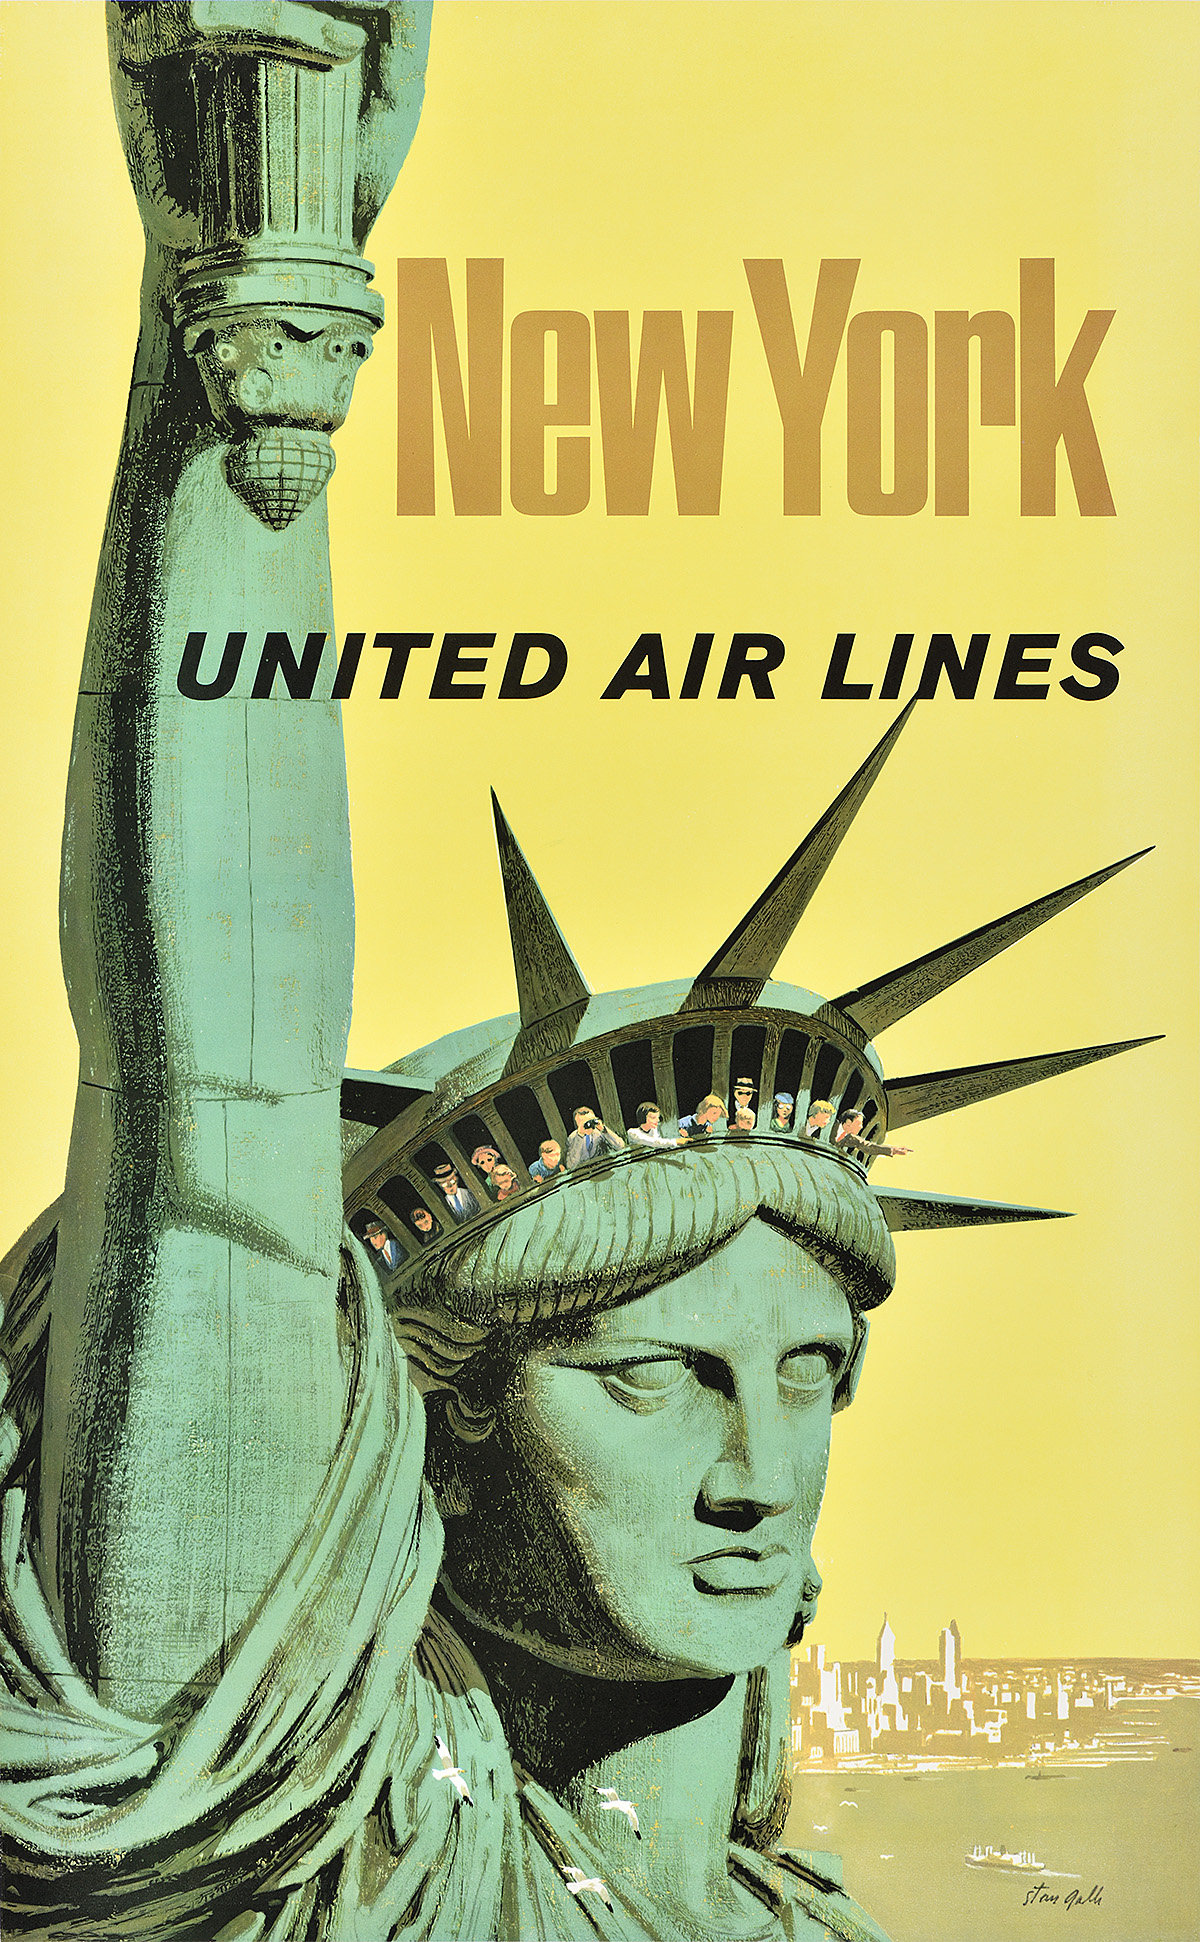 A poster of the head and arm of the Statue of Liberty with many people looking out from her crown.